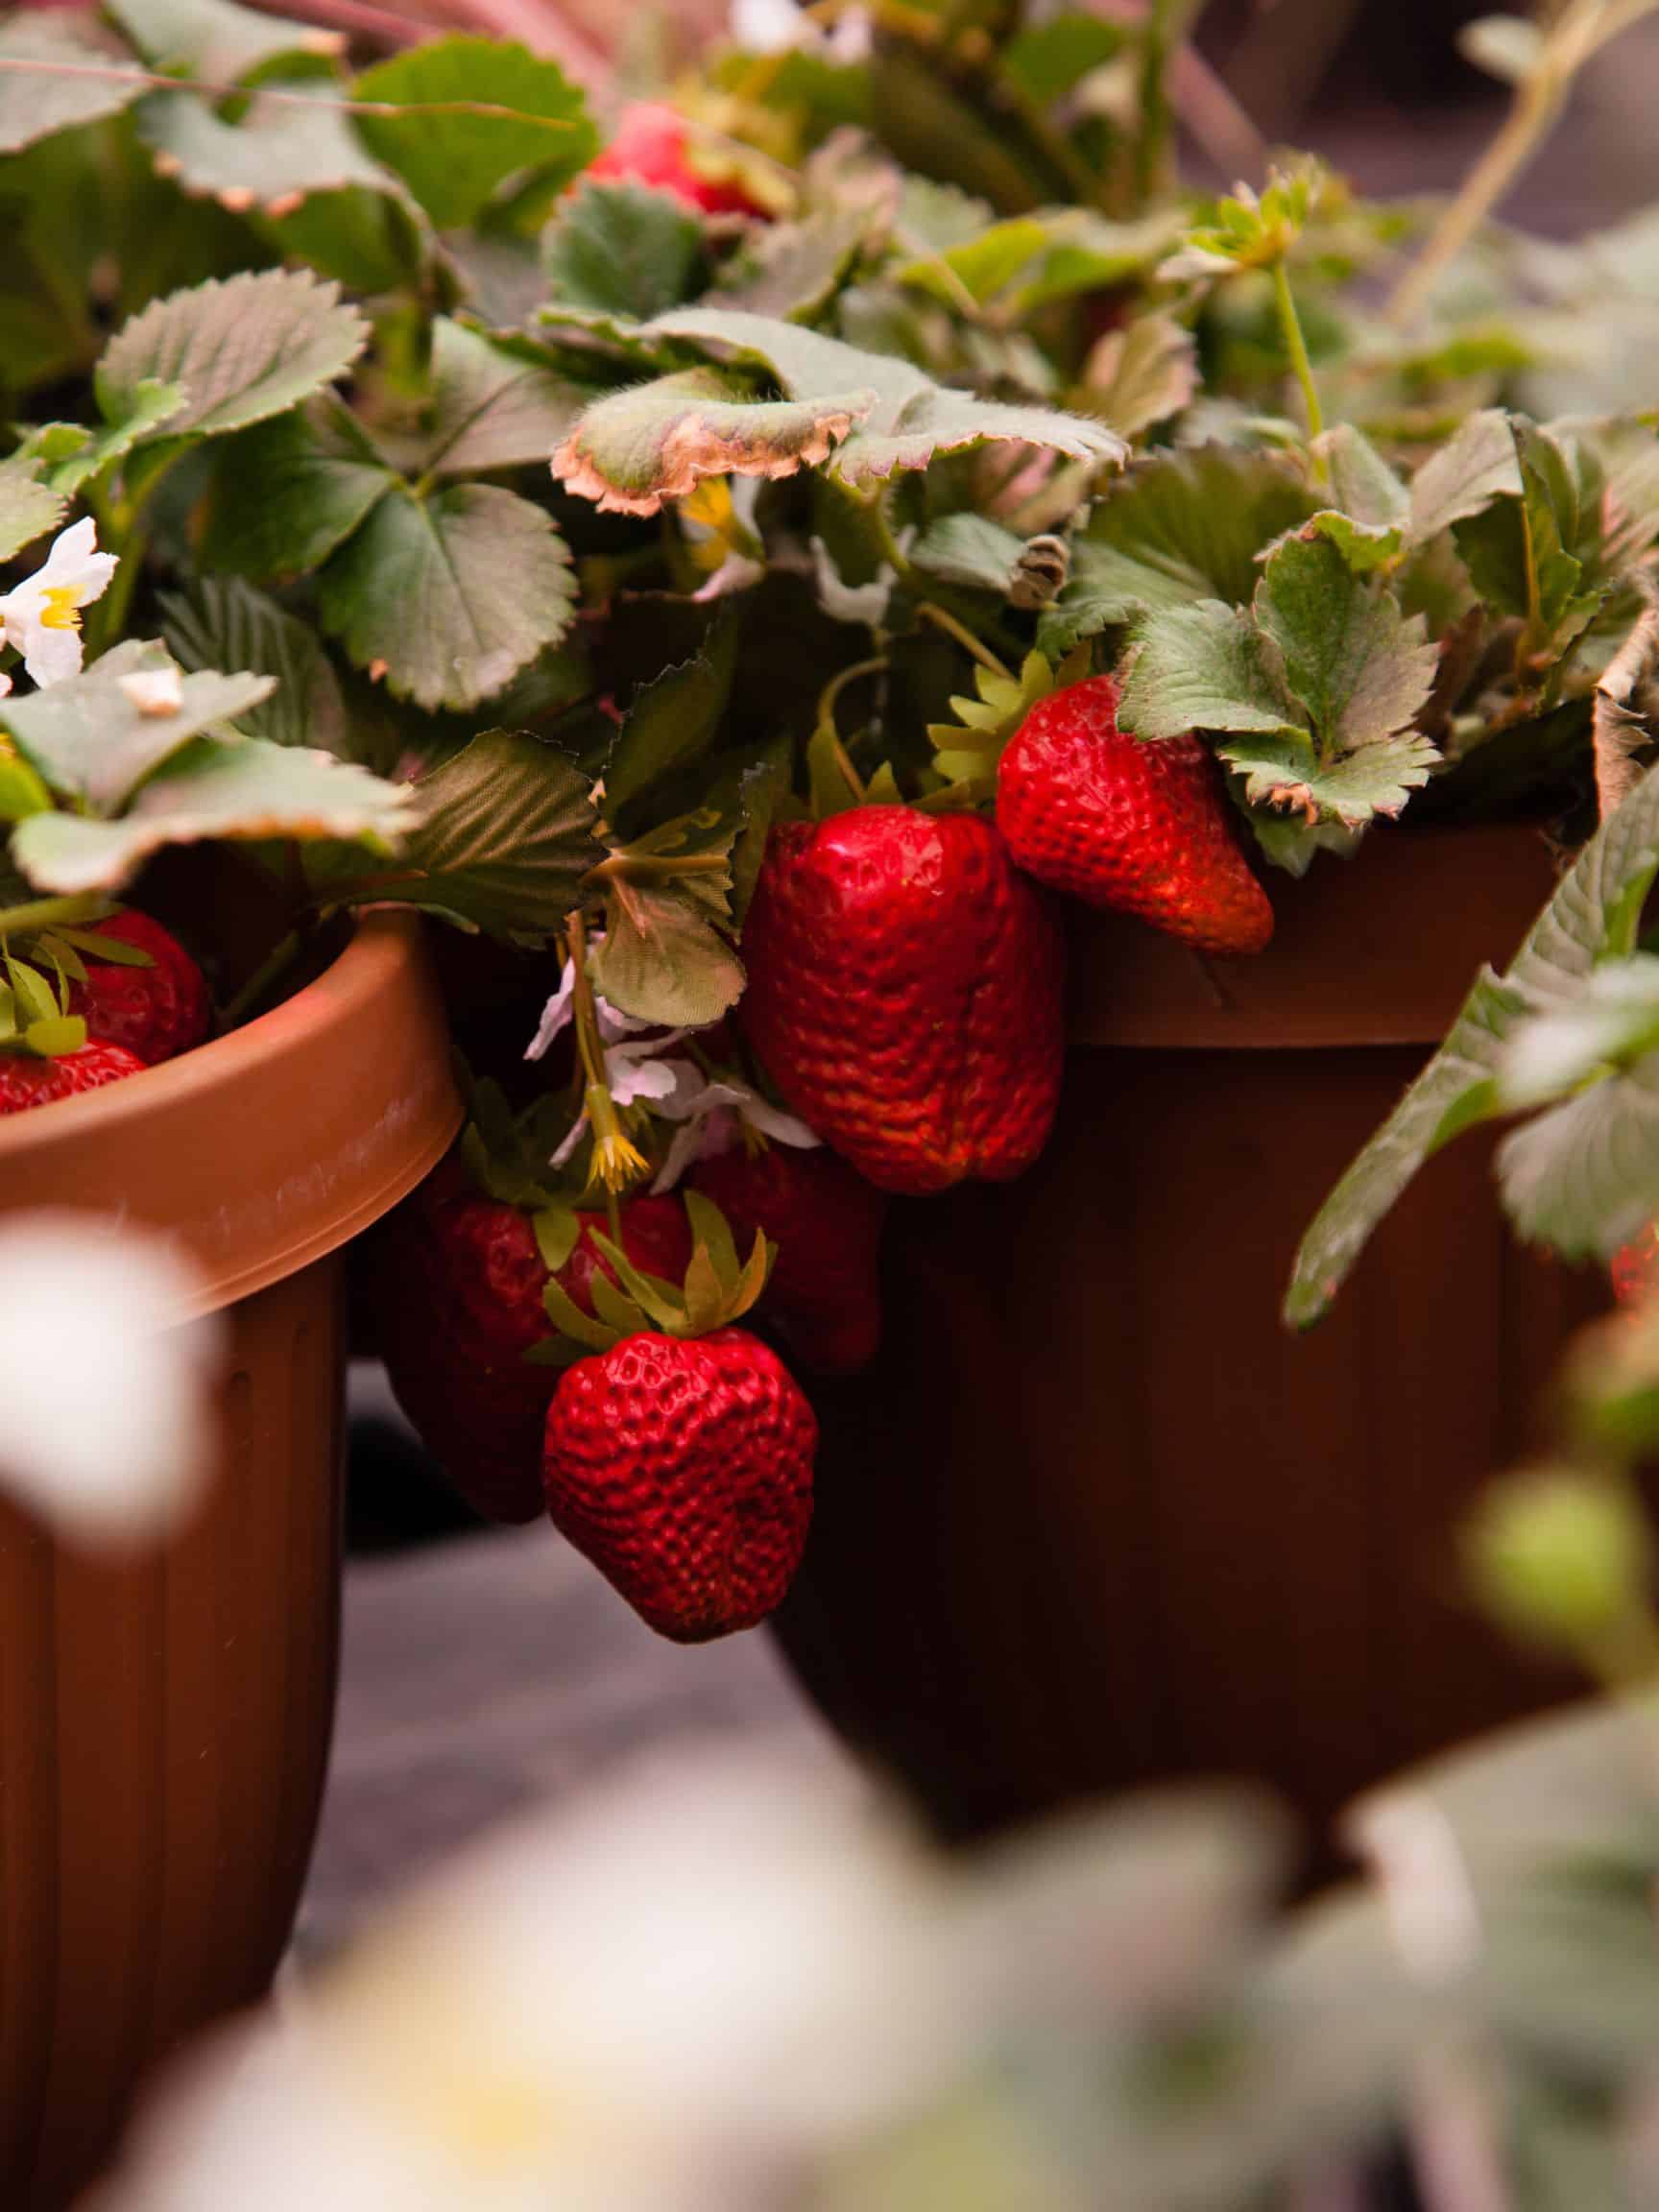 Strawberry runners in pots.